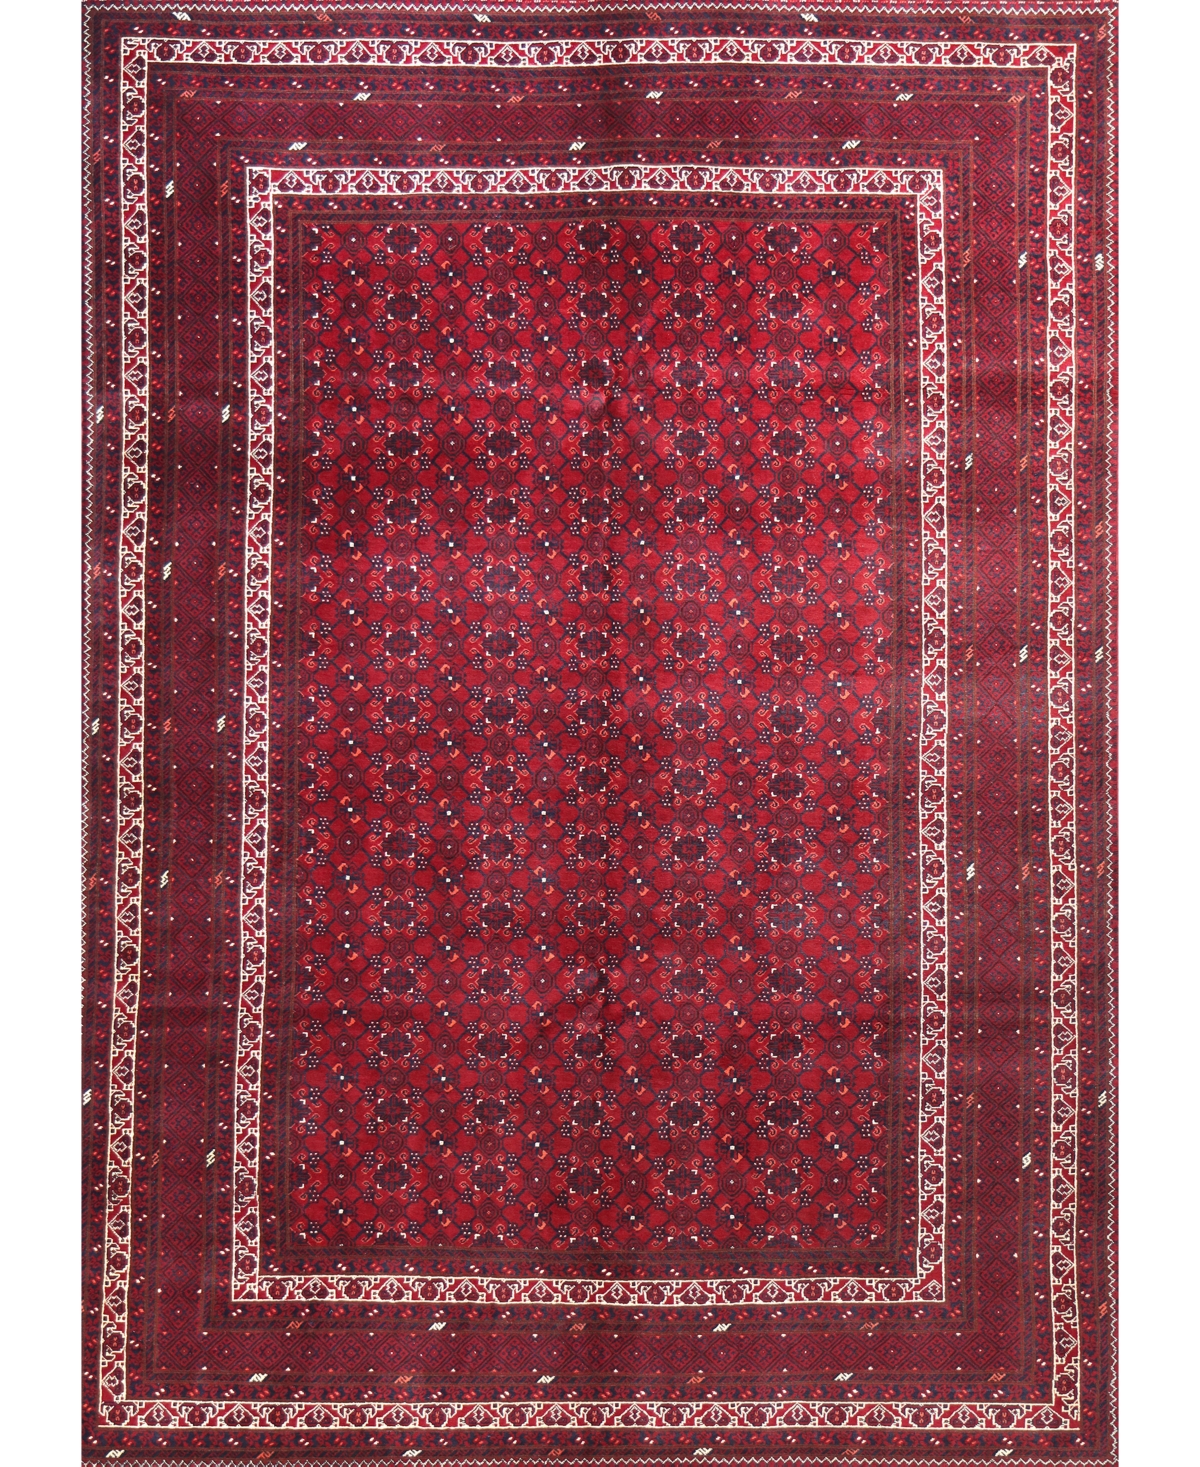 Bb Rugs One of a Kind Fine Beshir 6'7in x 9'6in Area Rug - Red